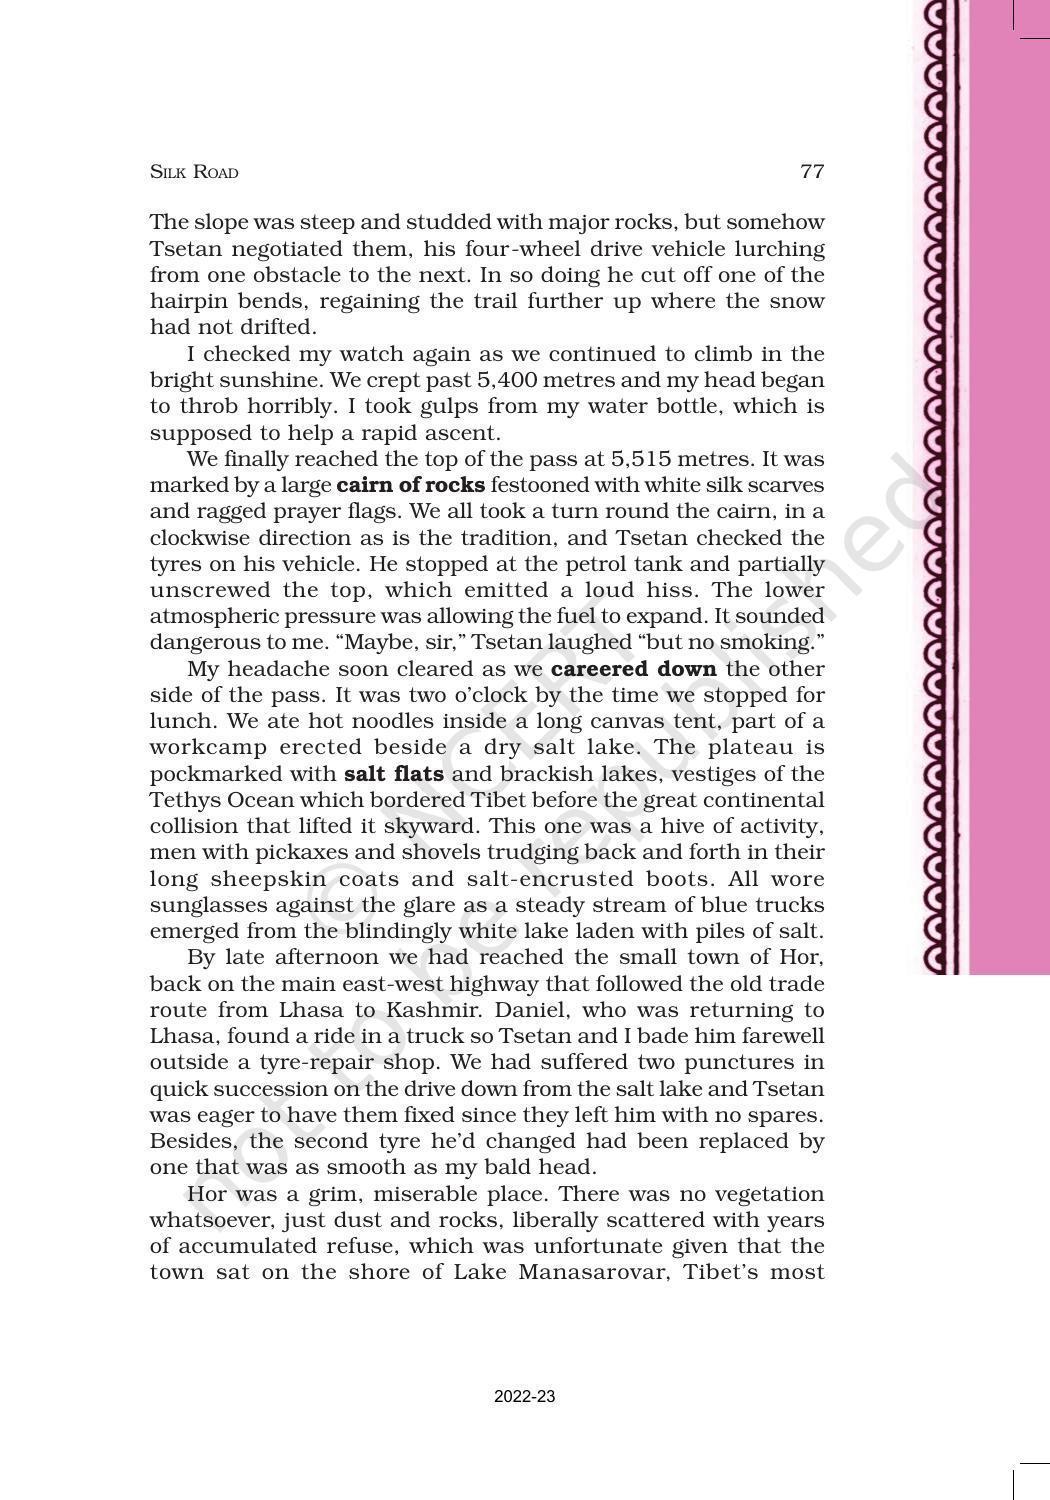 NCERT Book for Class 11 English Hornbill Chapter 8 Silk Road - Page 4